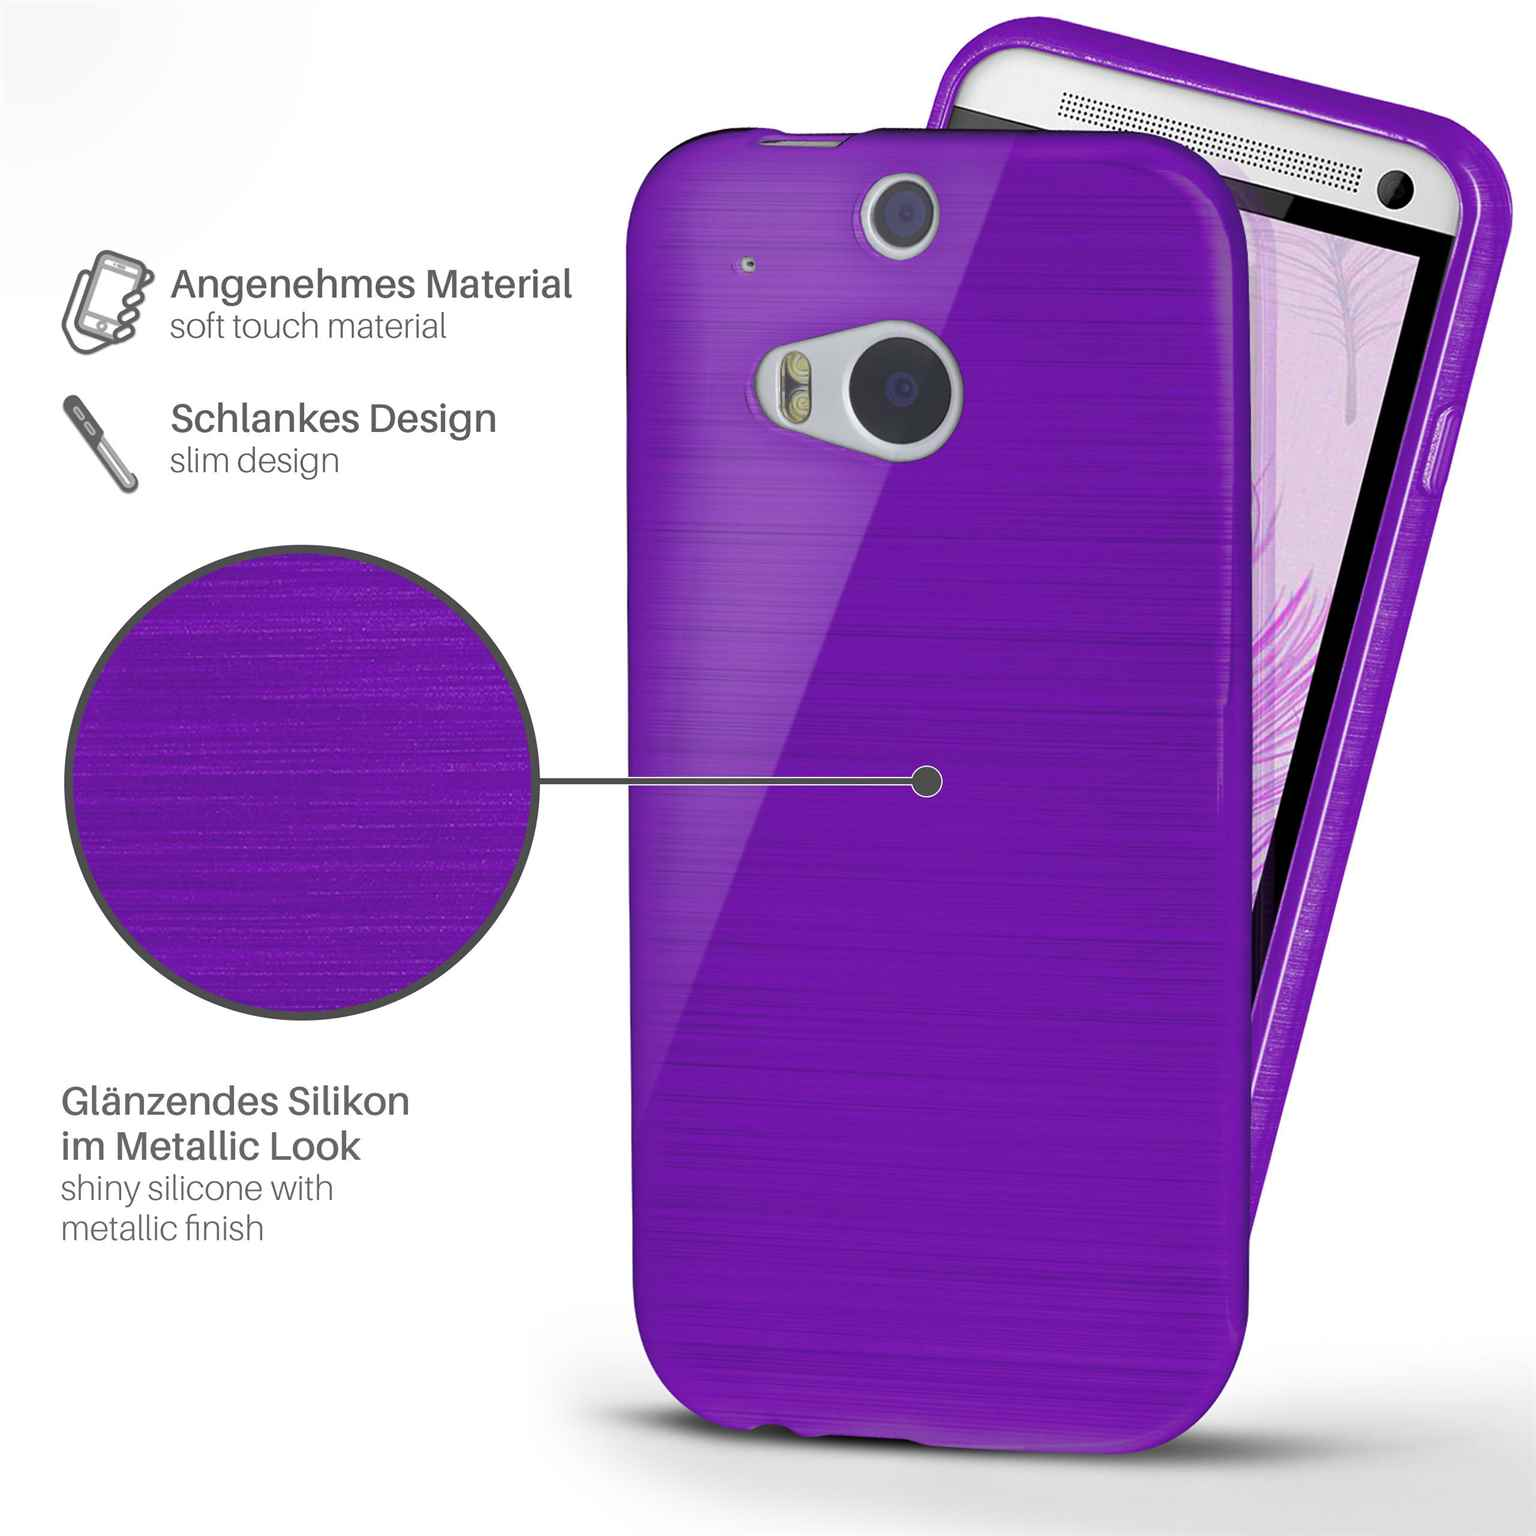 Brushed HTC, Backcover, Case, Purpure-Purple M8s, MOEX One